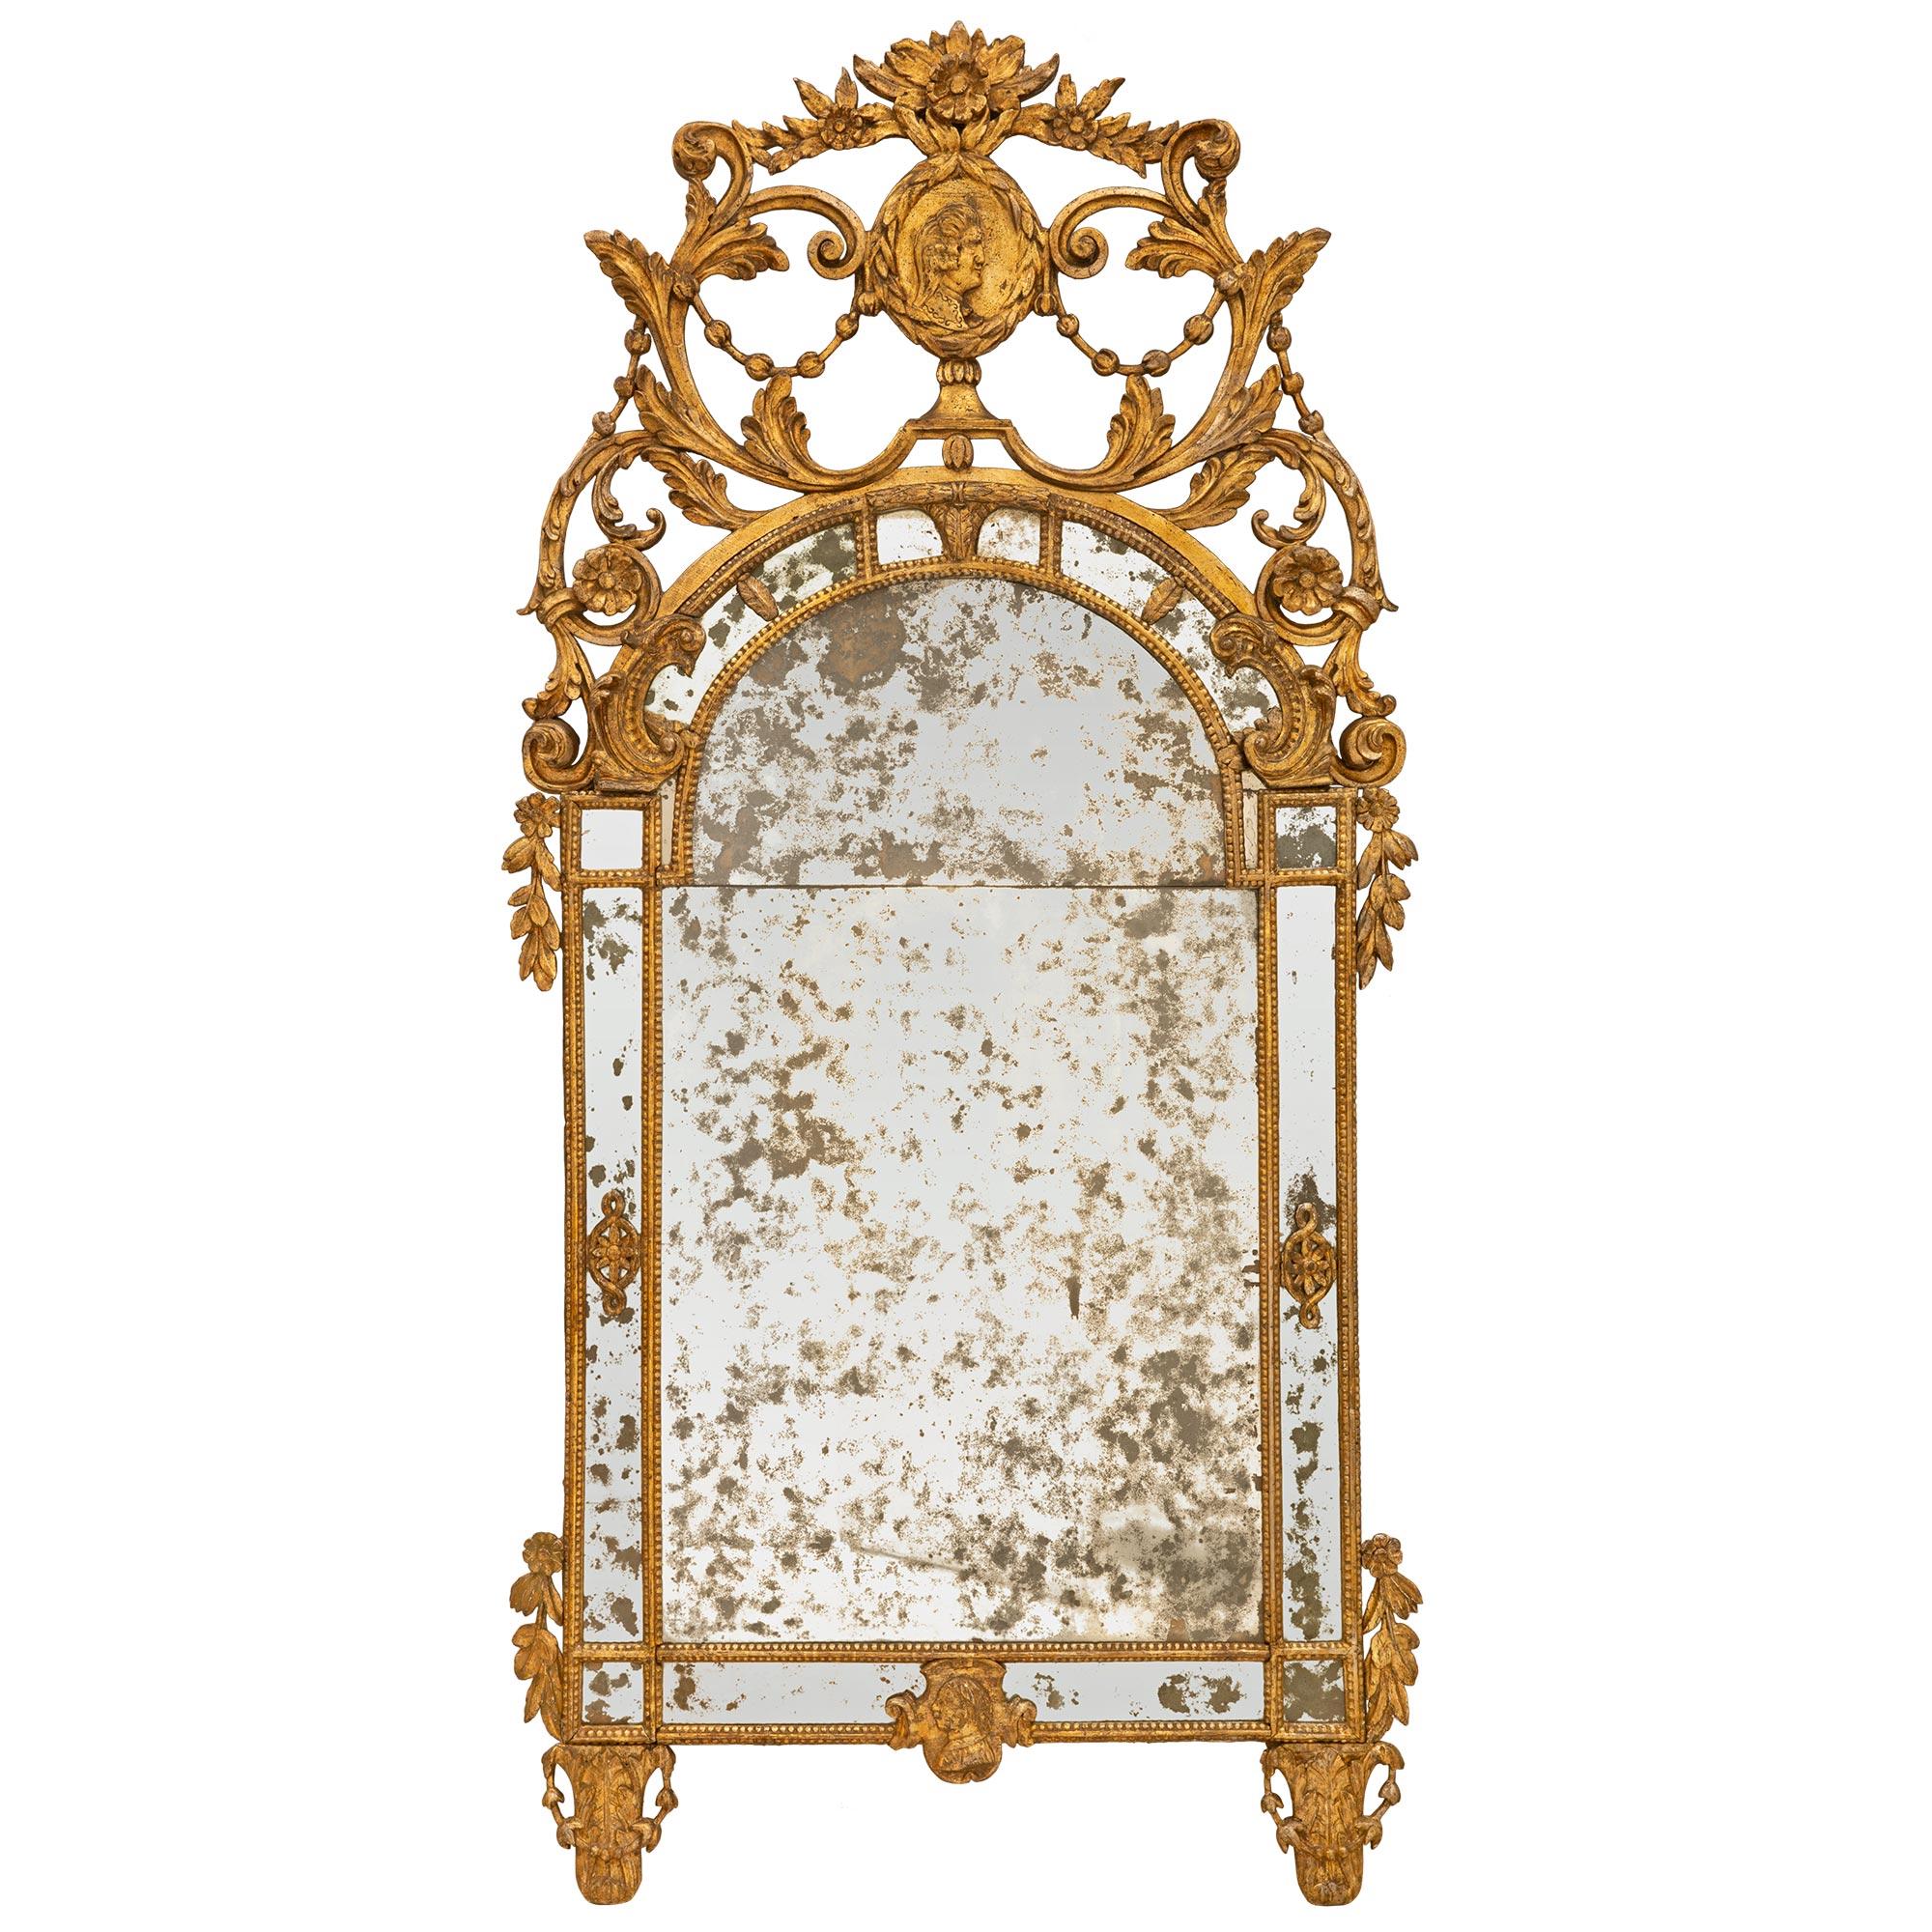 A magnificent Italian 18th century Louis XVI period Mecca mirror. The double frame mirror is raised on scrolled supports and foliate garlands at each corner, flanking a central male cameo, and design elements at each side. The rounded top is below